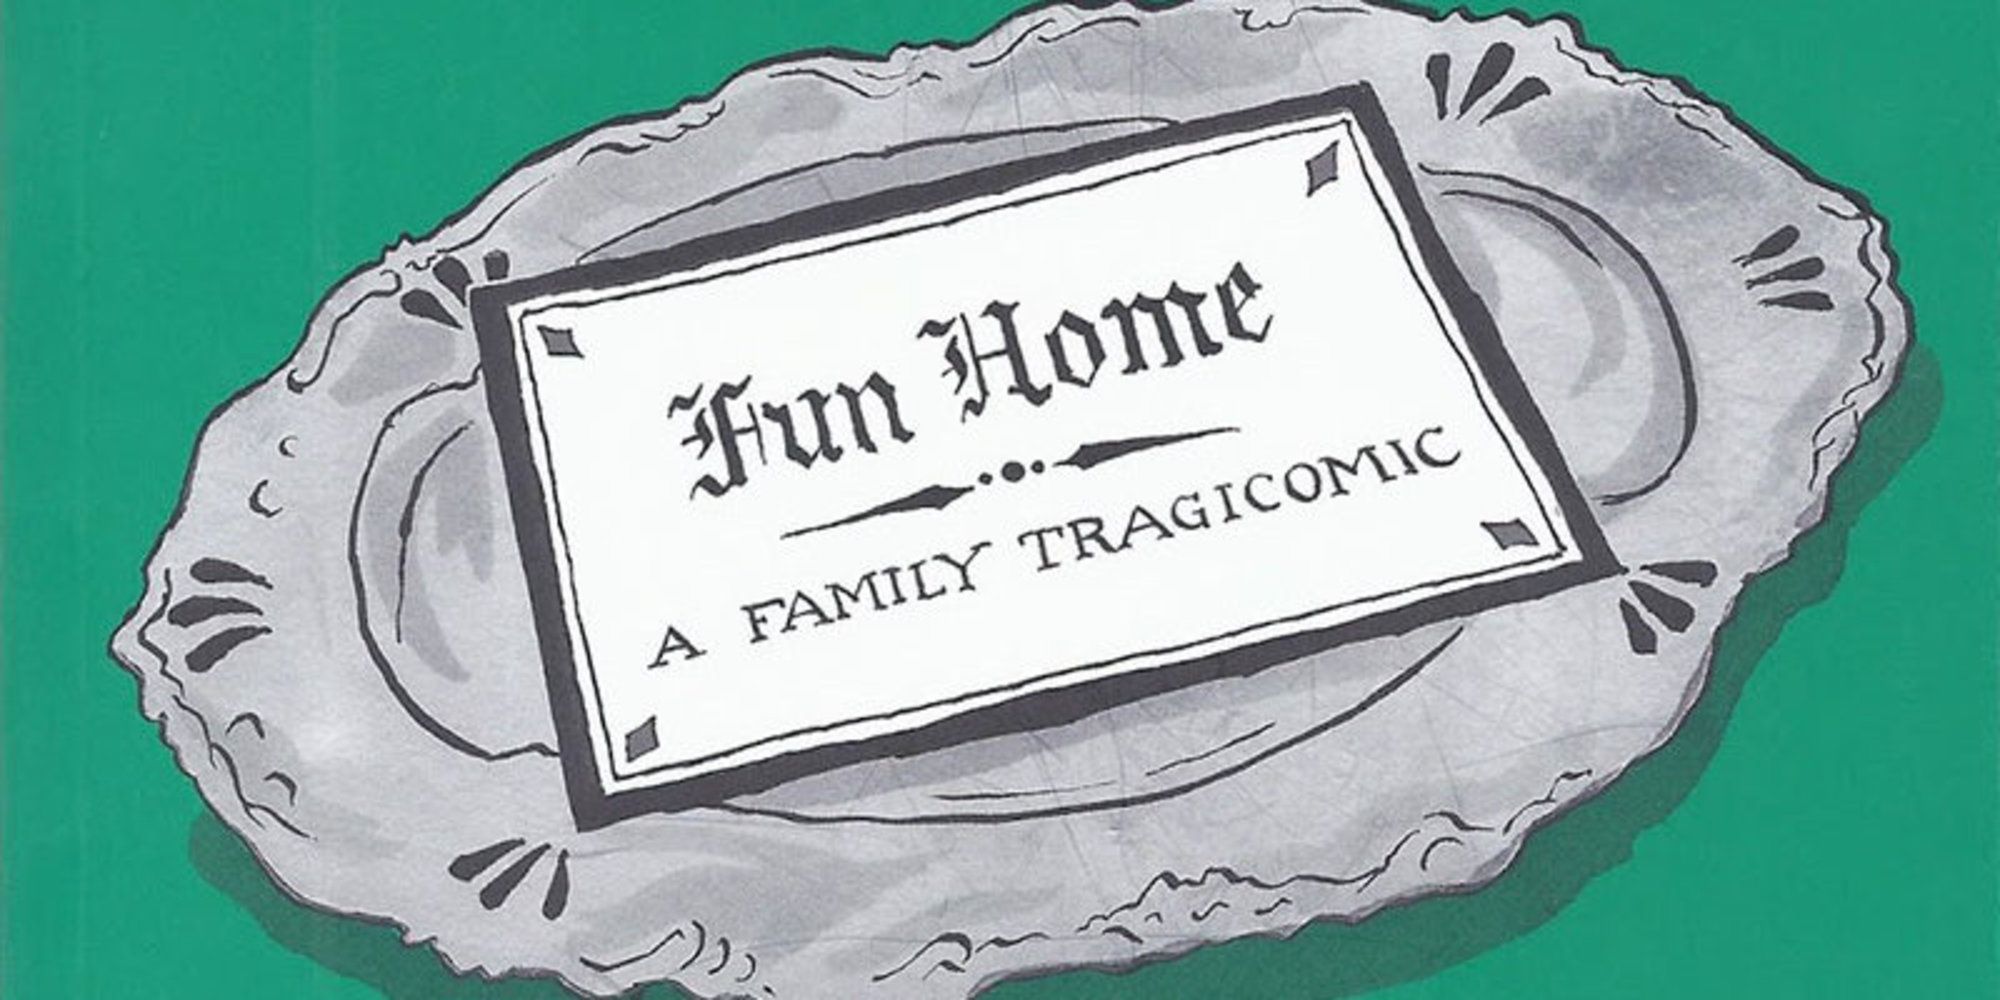 A plate with a paper that says "fun home a family tragicomic" on it